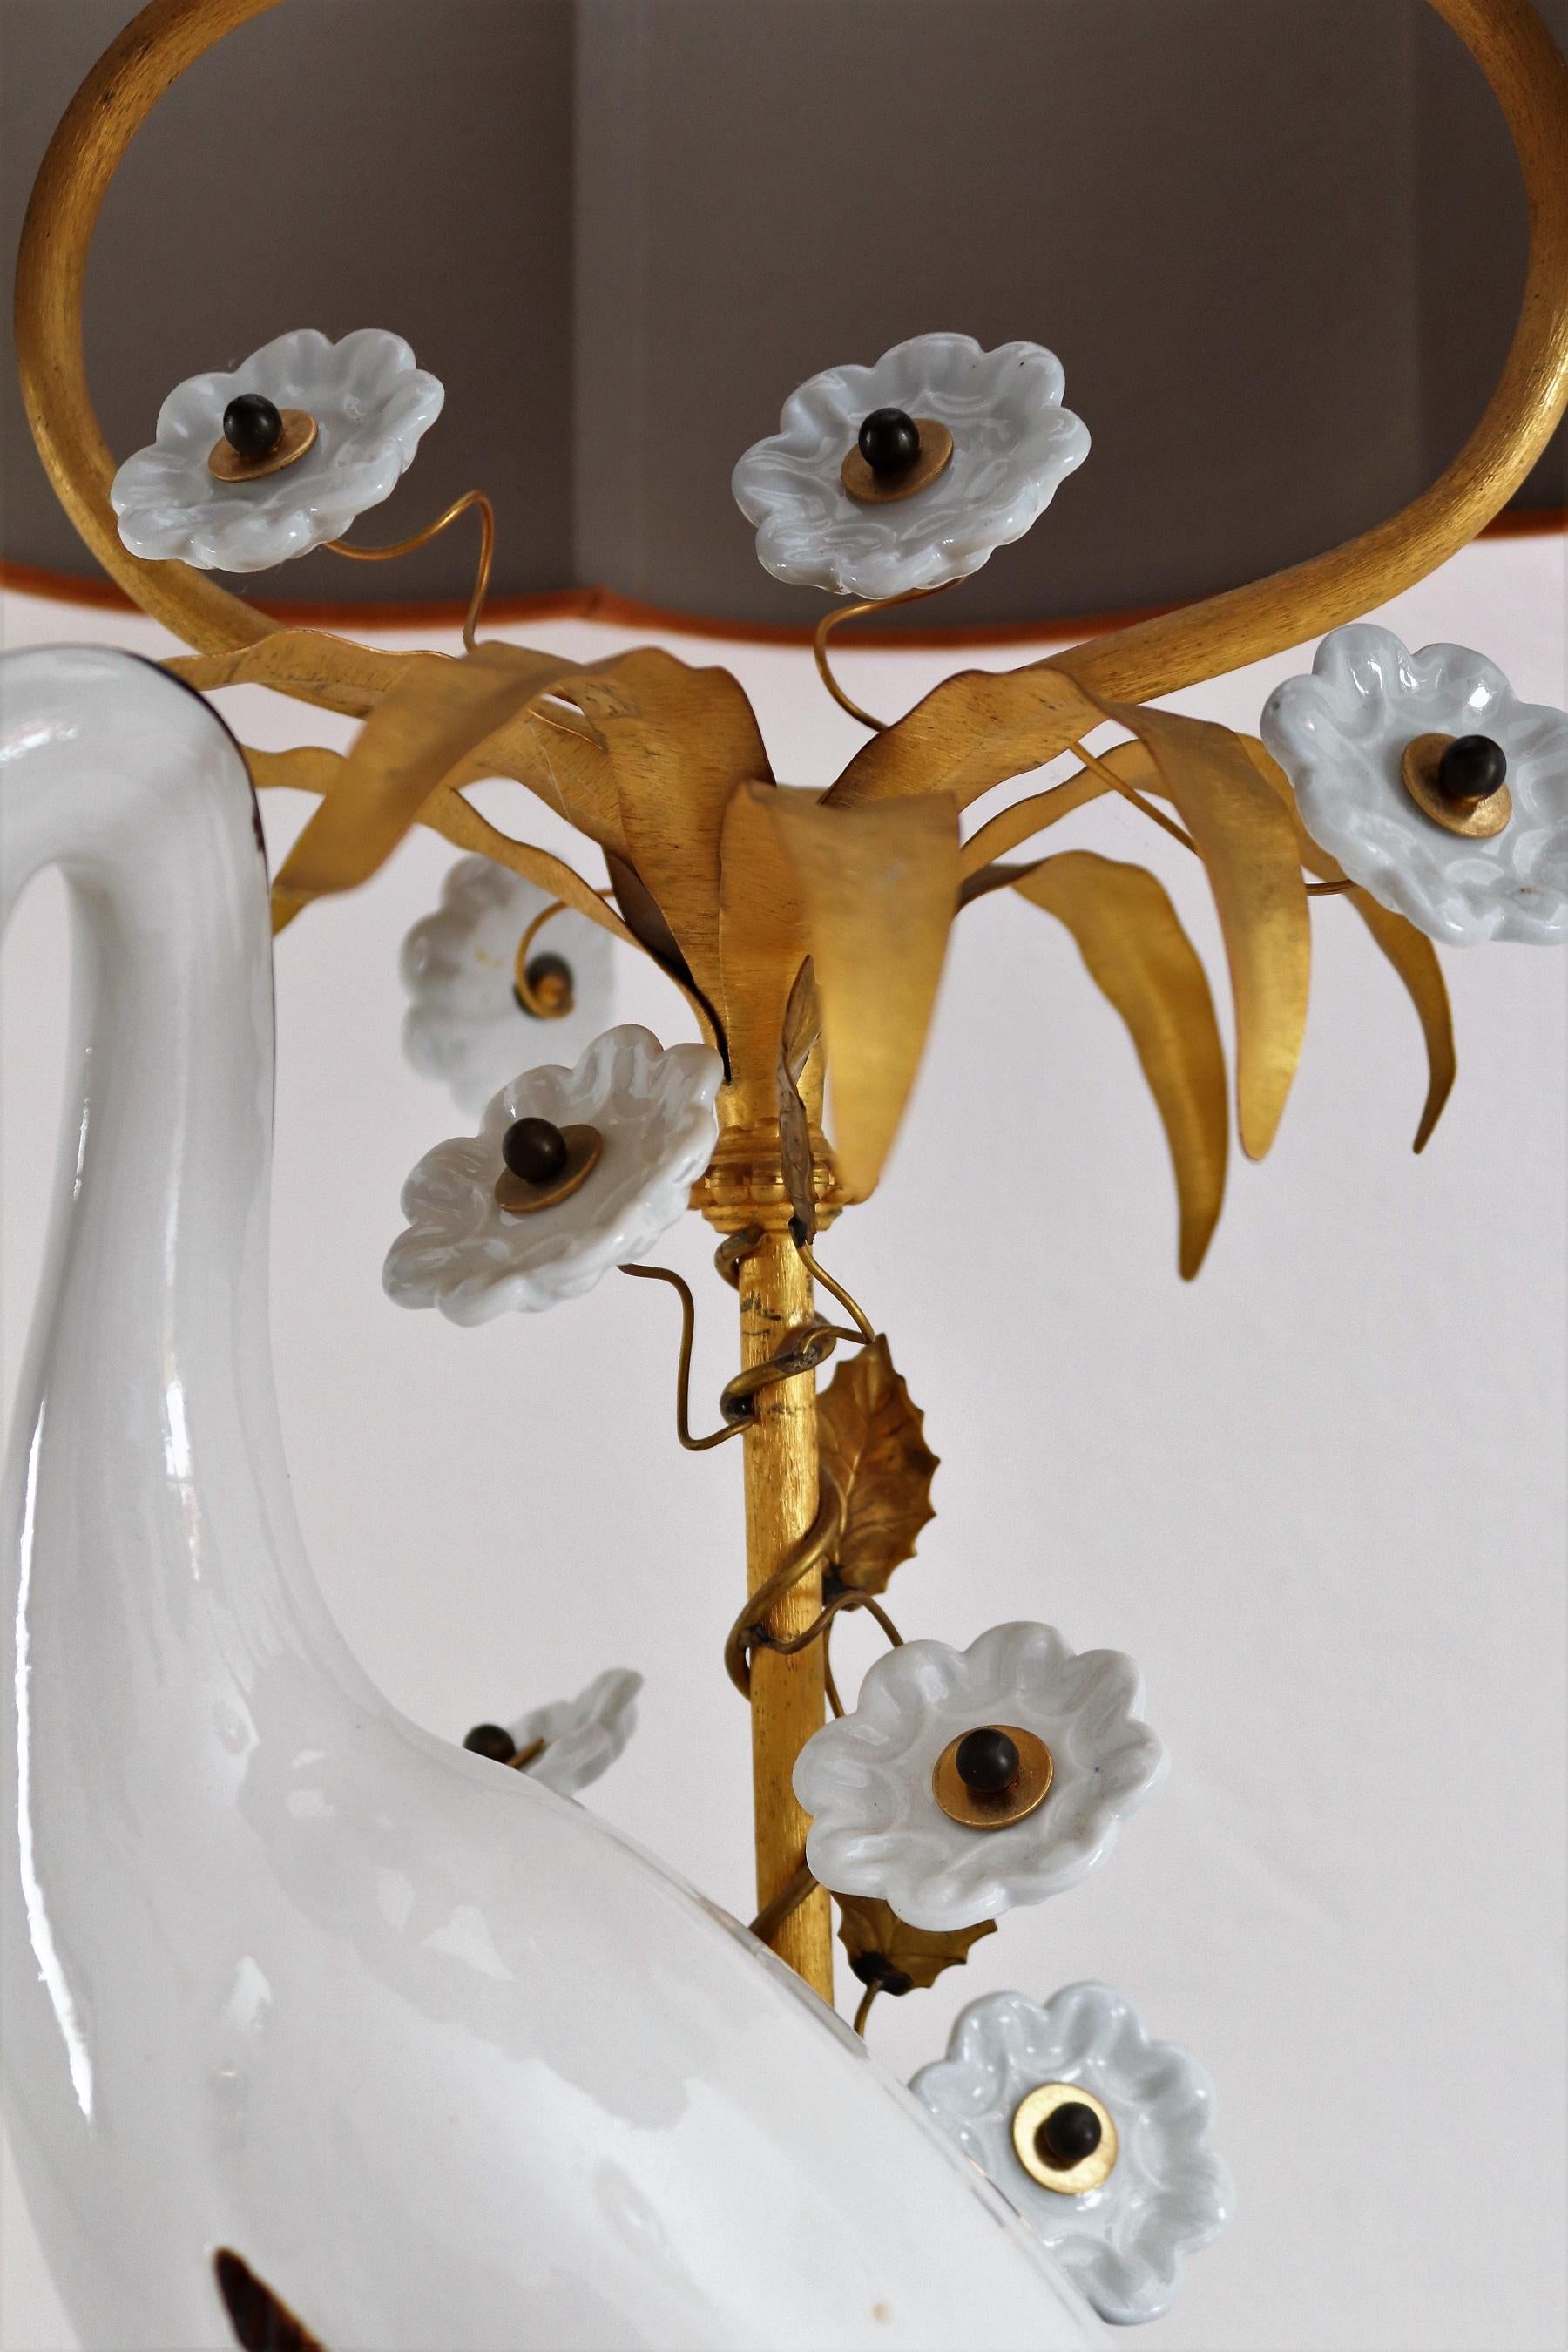 Mid-Century Modern French Table Lamp with Porcelain Crane or Heron and Flowers, 1970s For Sale